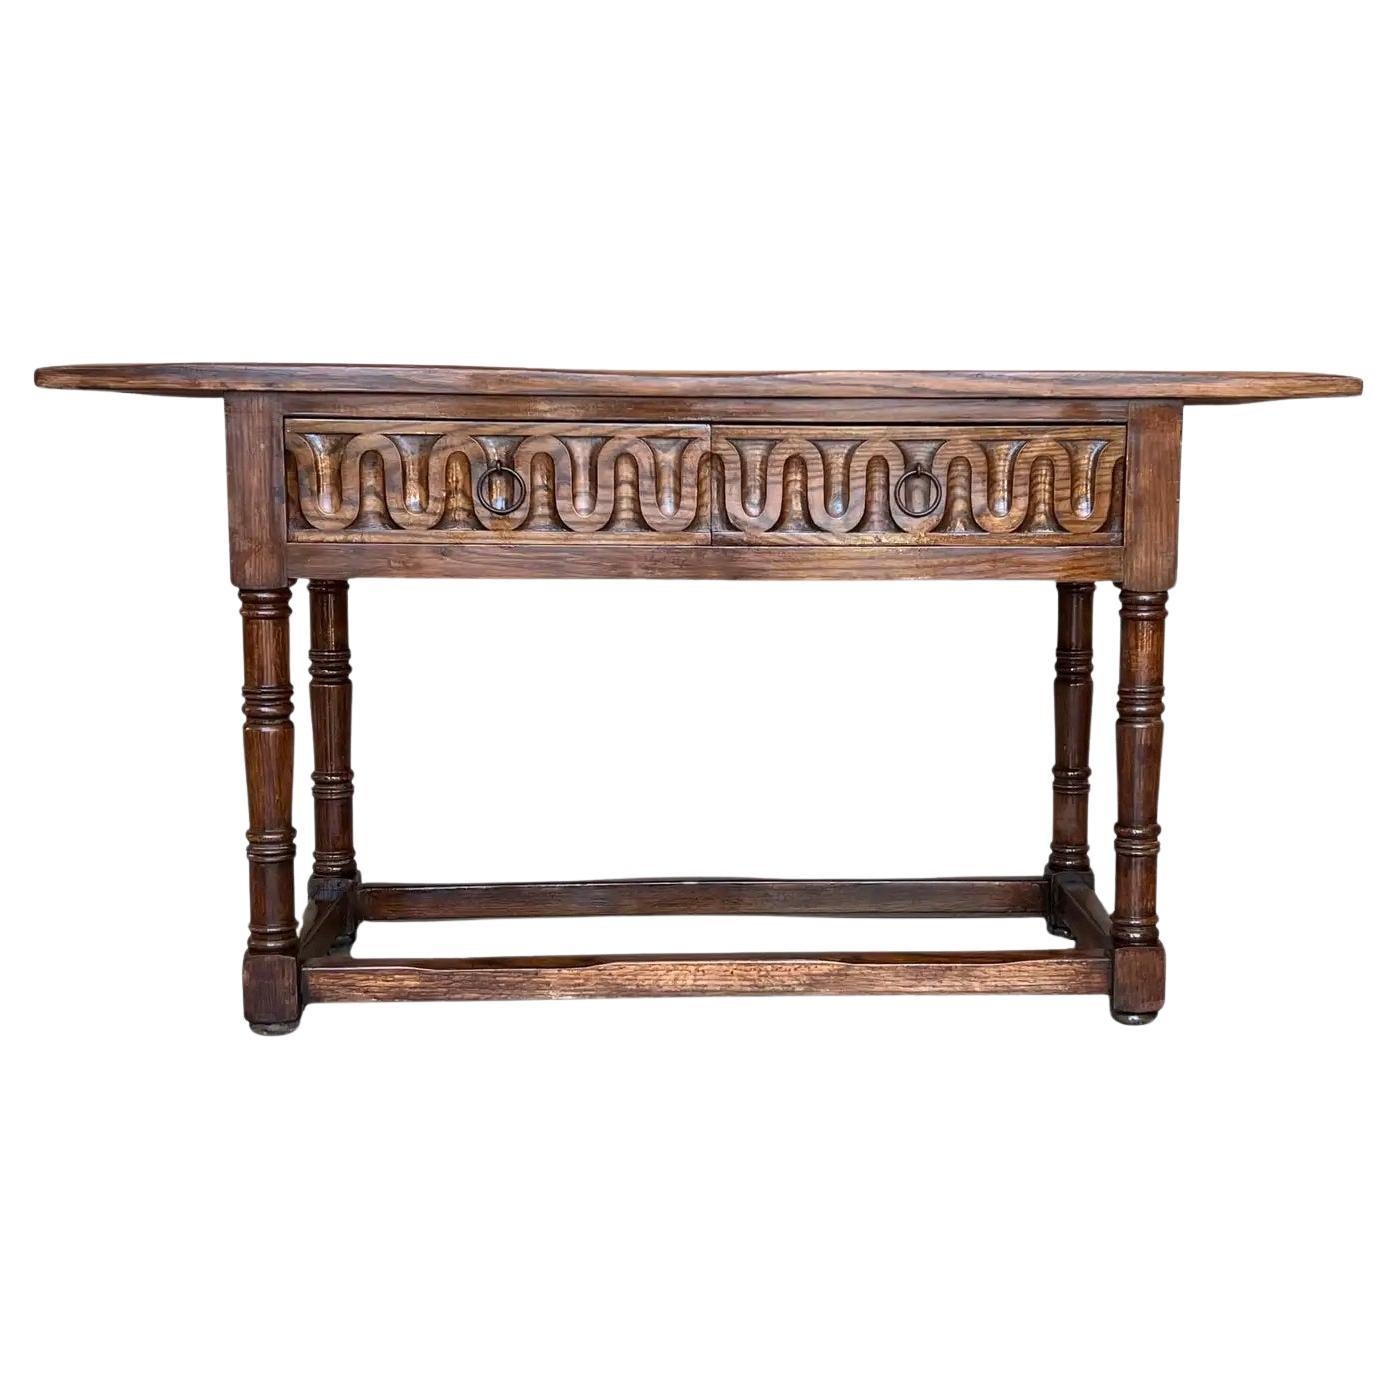 Early 20th Century Spanish Carved Console Table with Two drawers